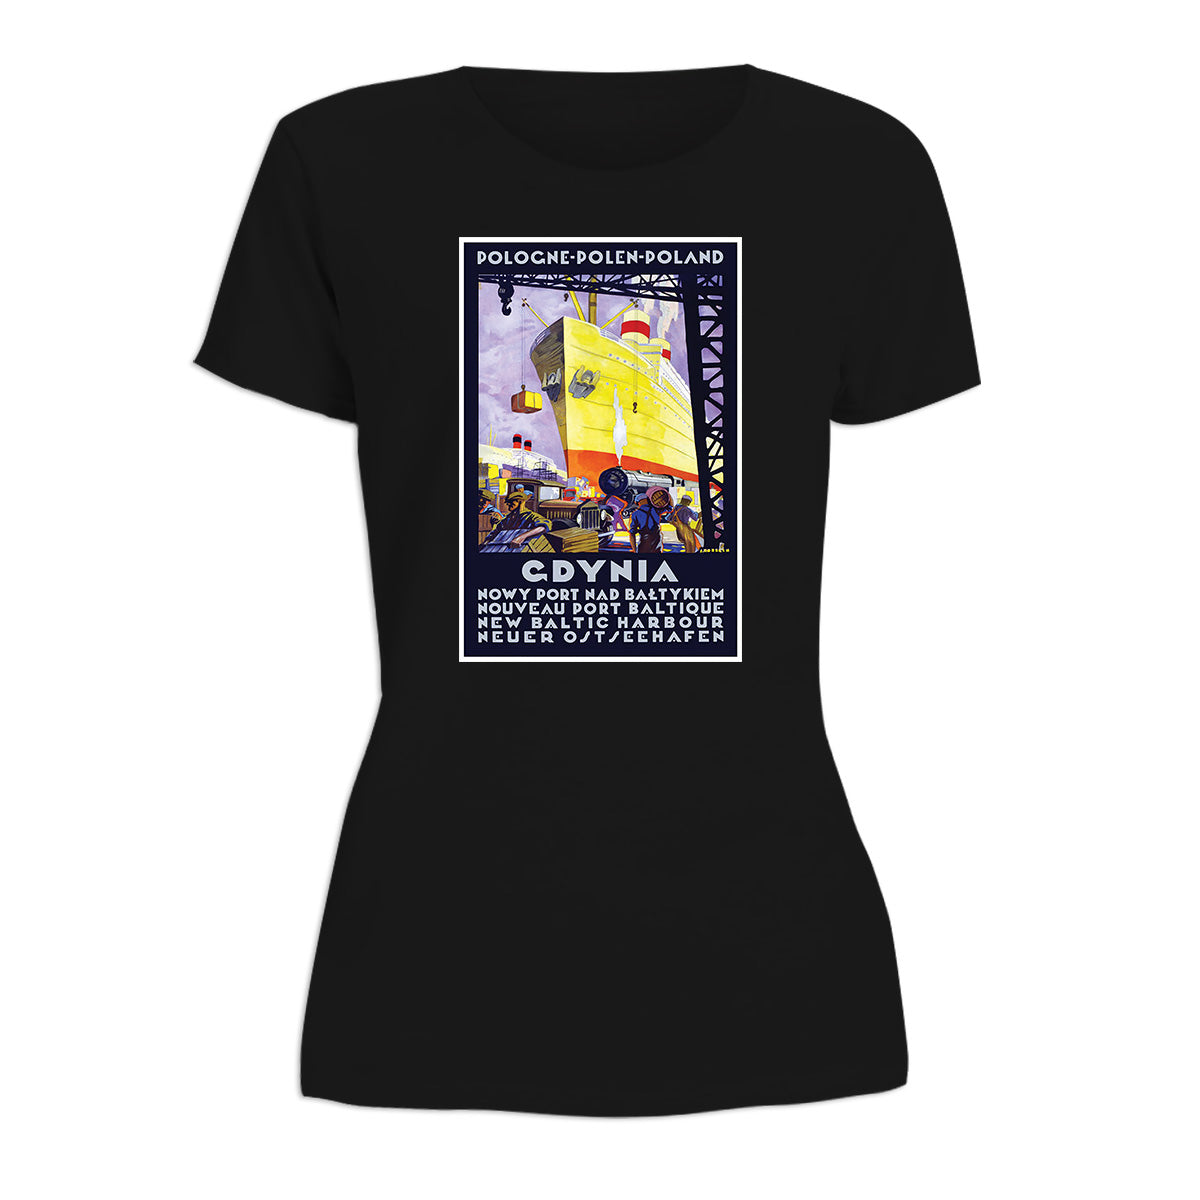 Vintage Poster Gdynia New Baltic Harbour Women's Short Sleeve Tshirt